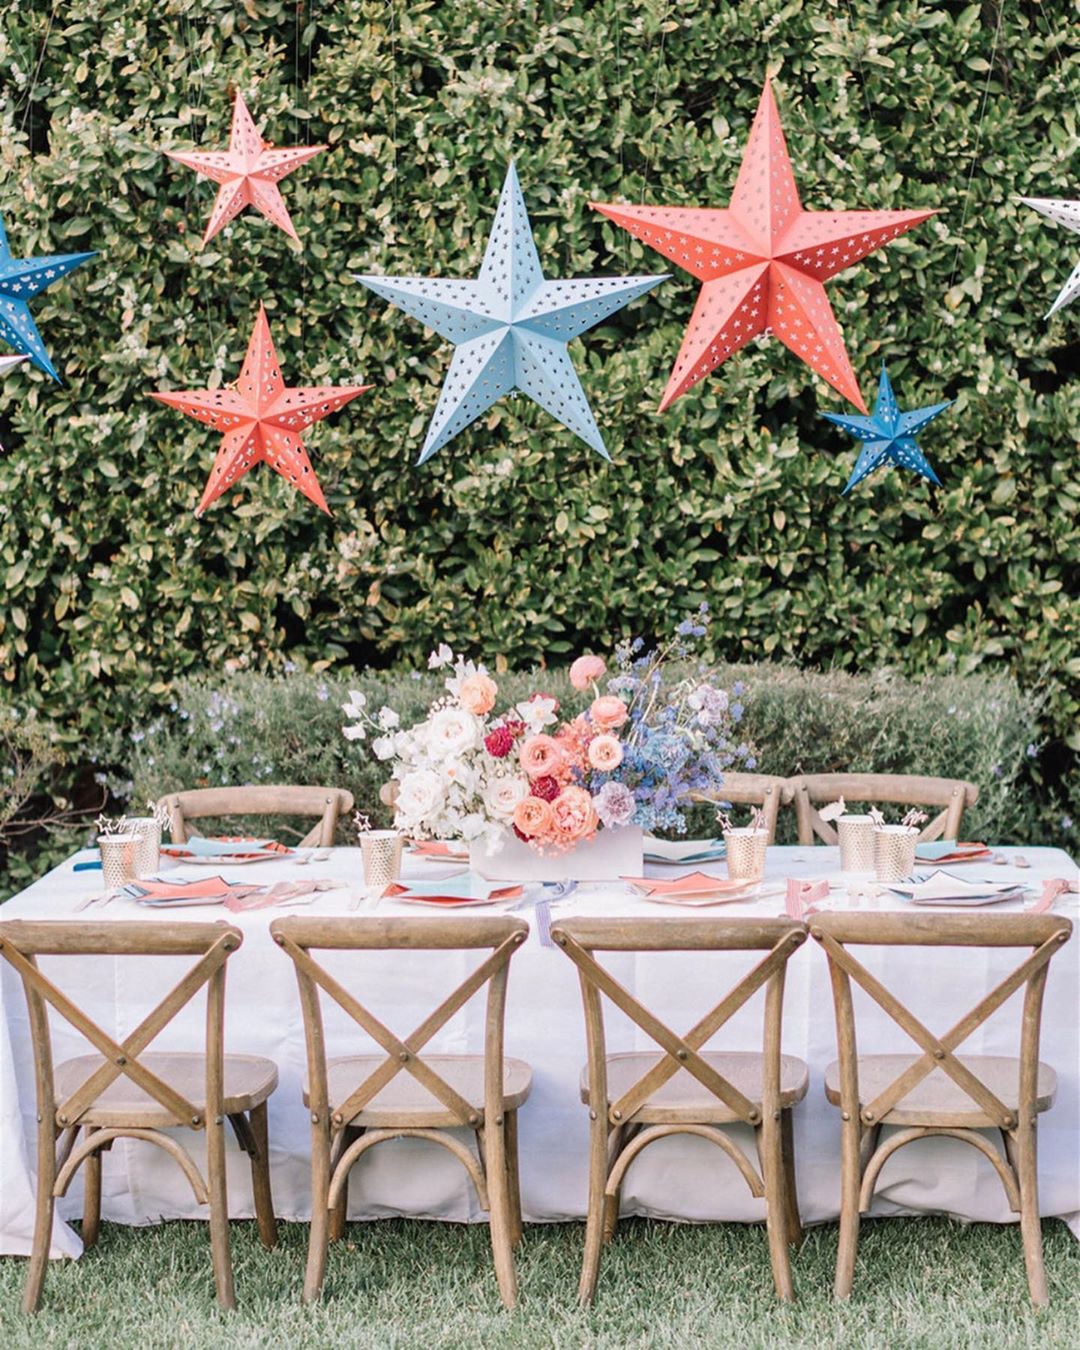 Outdoor Table Set up for a Fourth of July Party. Photo by Instagram user @deetsandthings